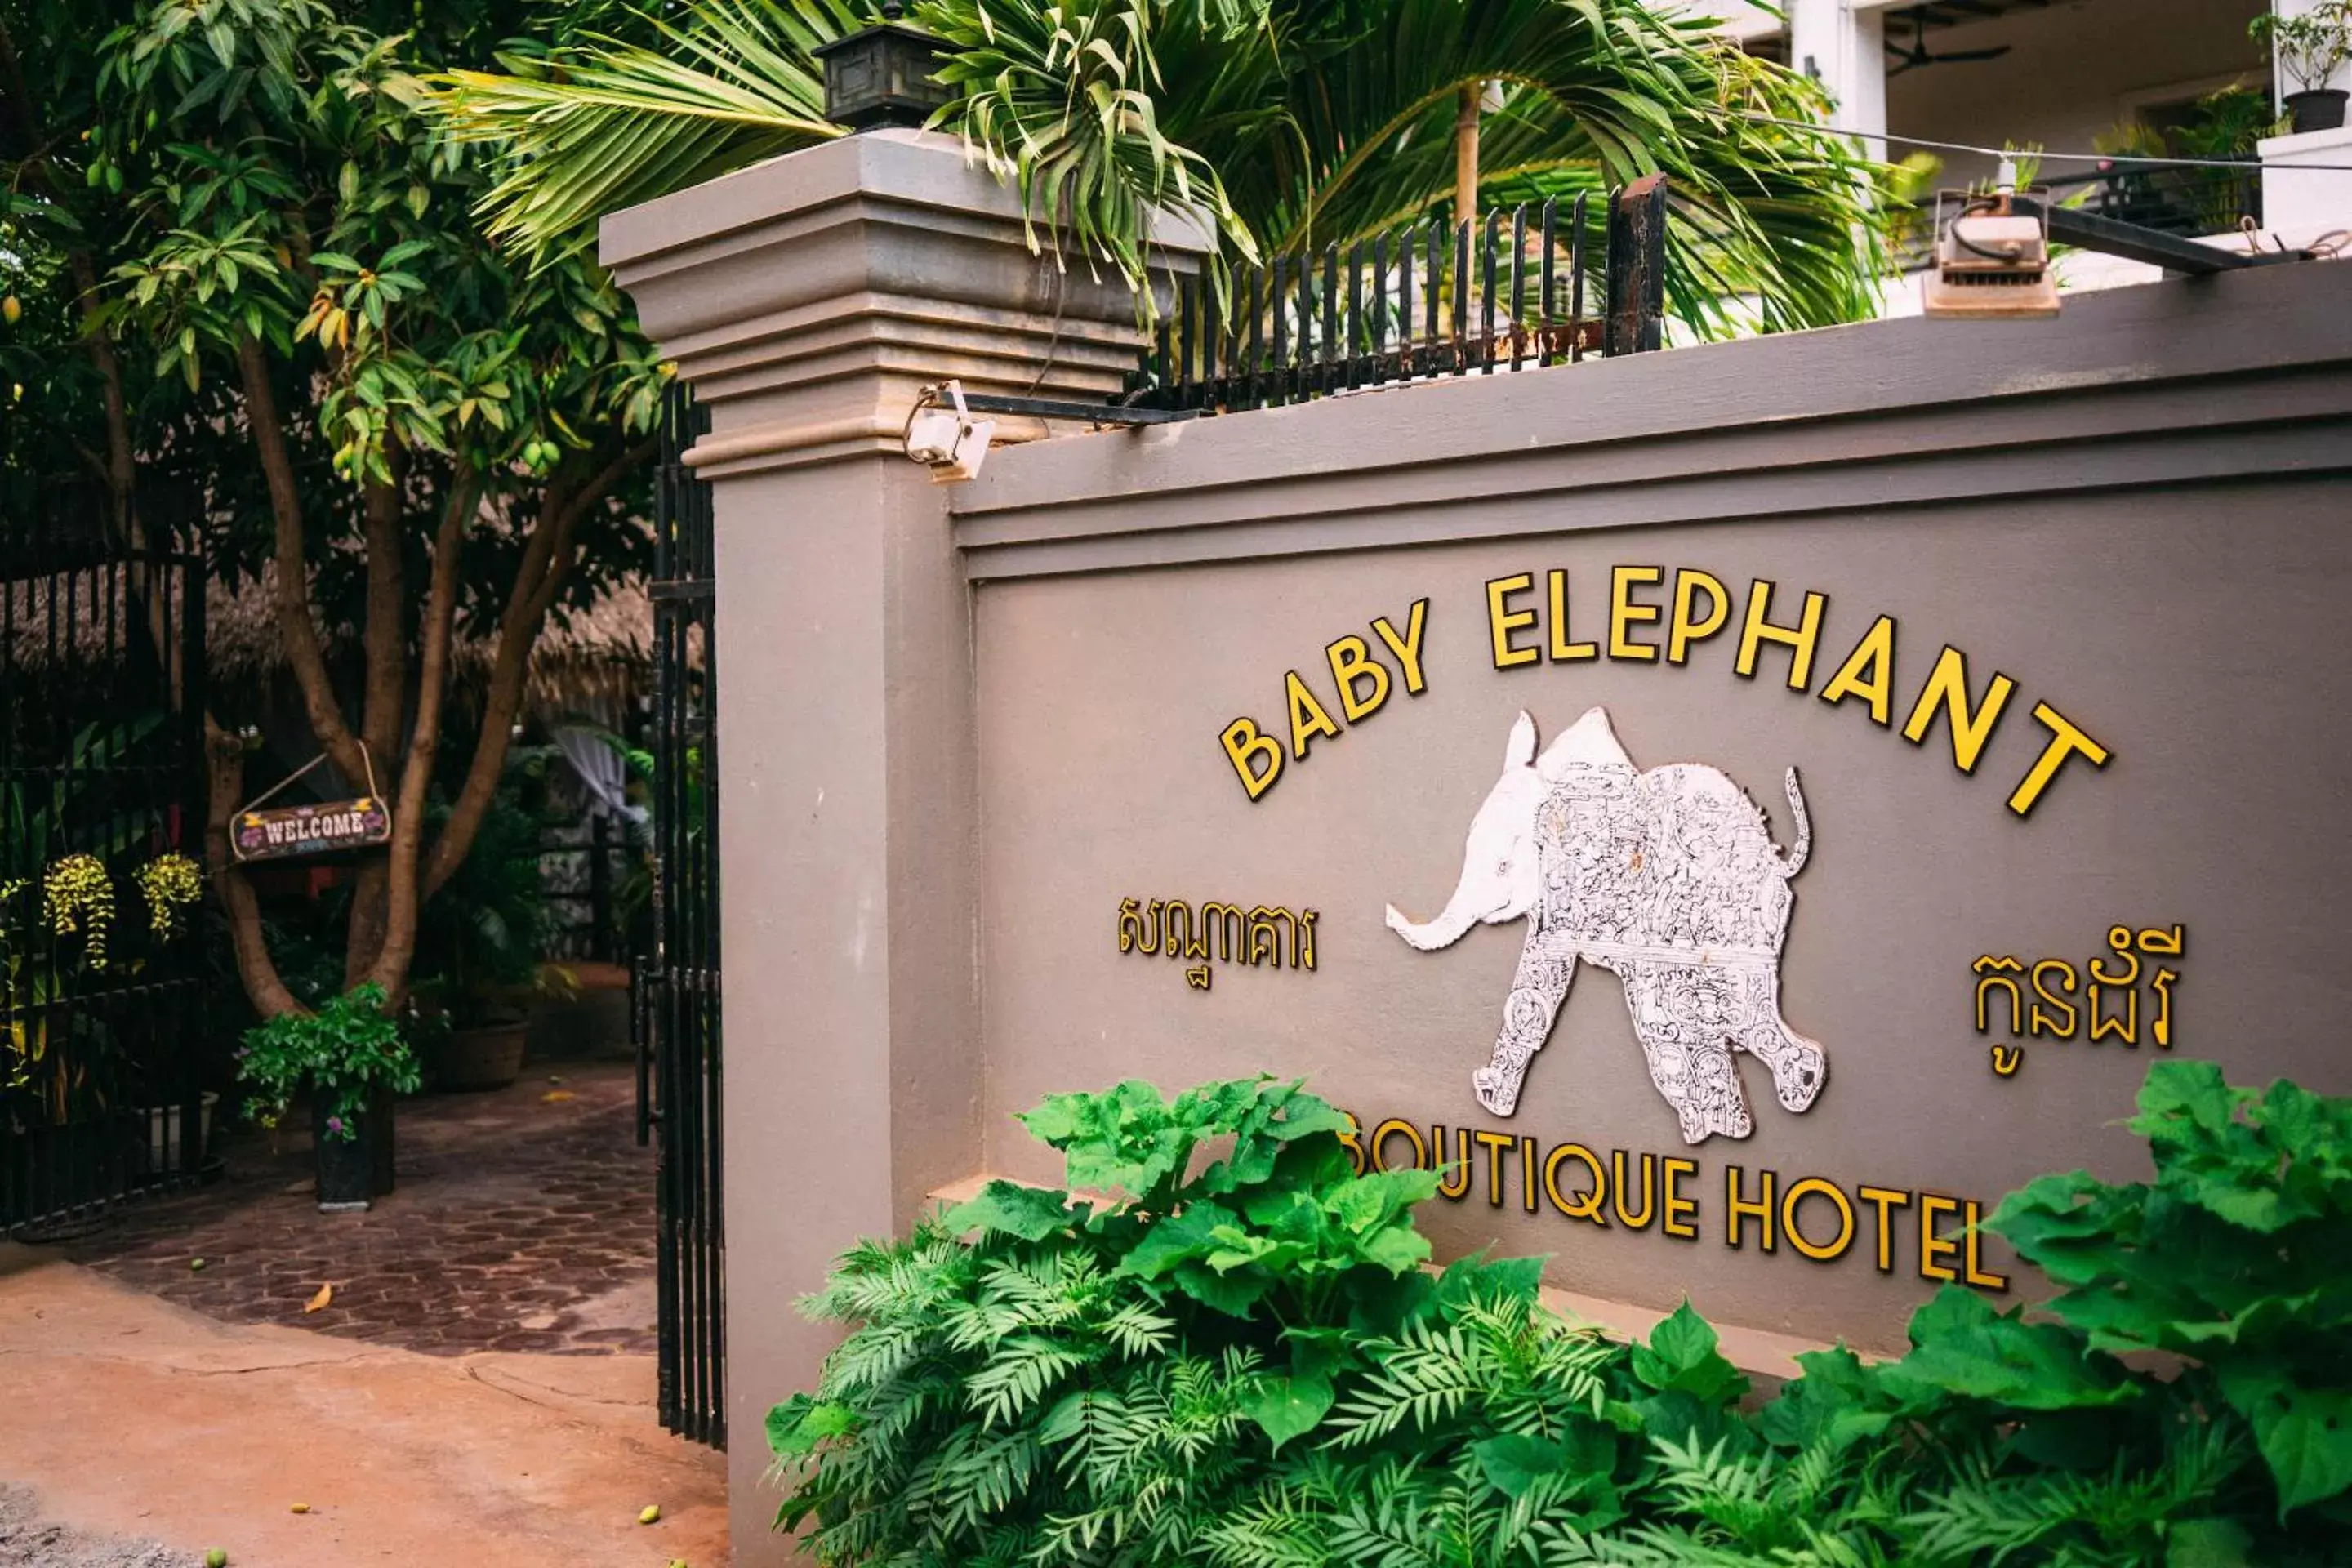 Property logo or sign, Property Logo/Sign in Baby Elephant Boutique Hotel